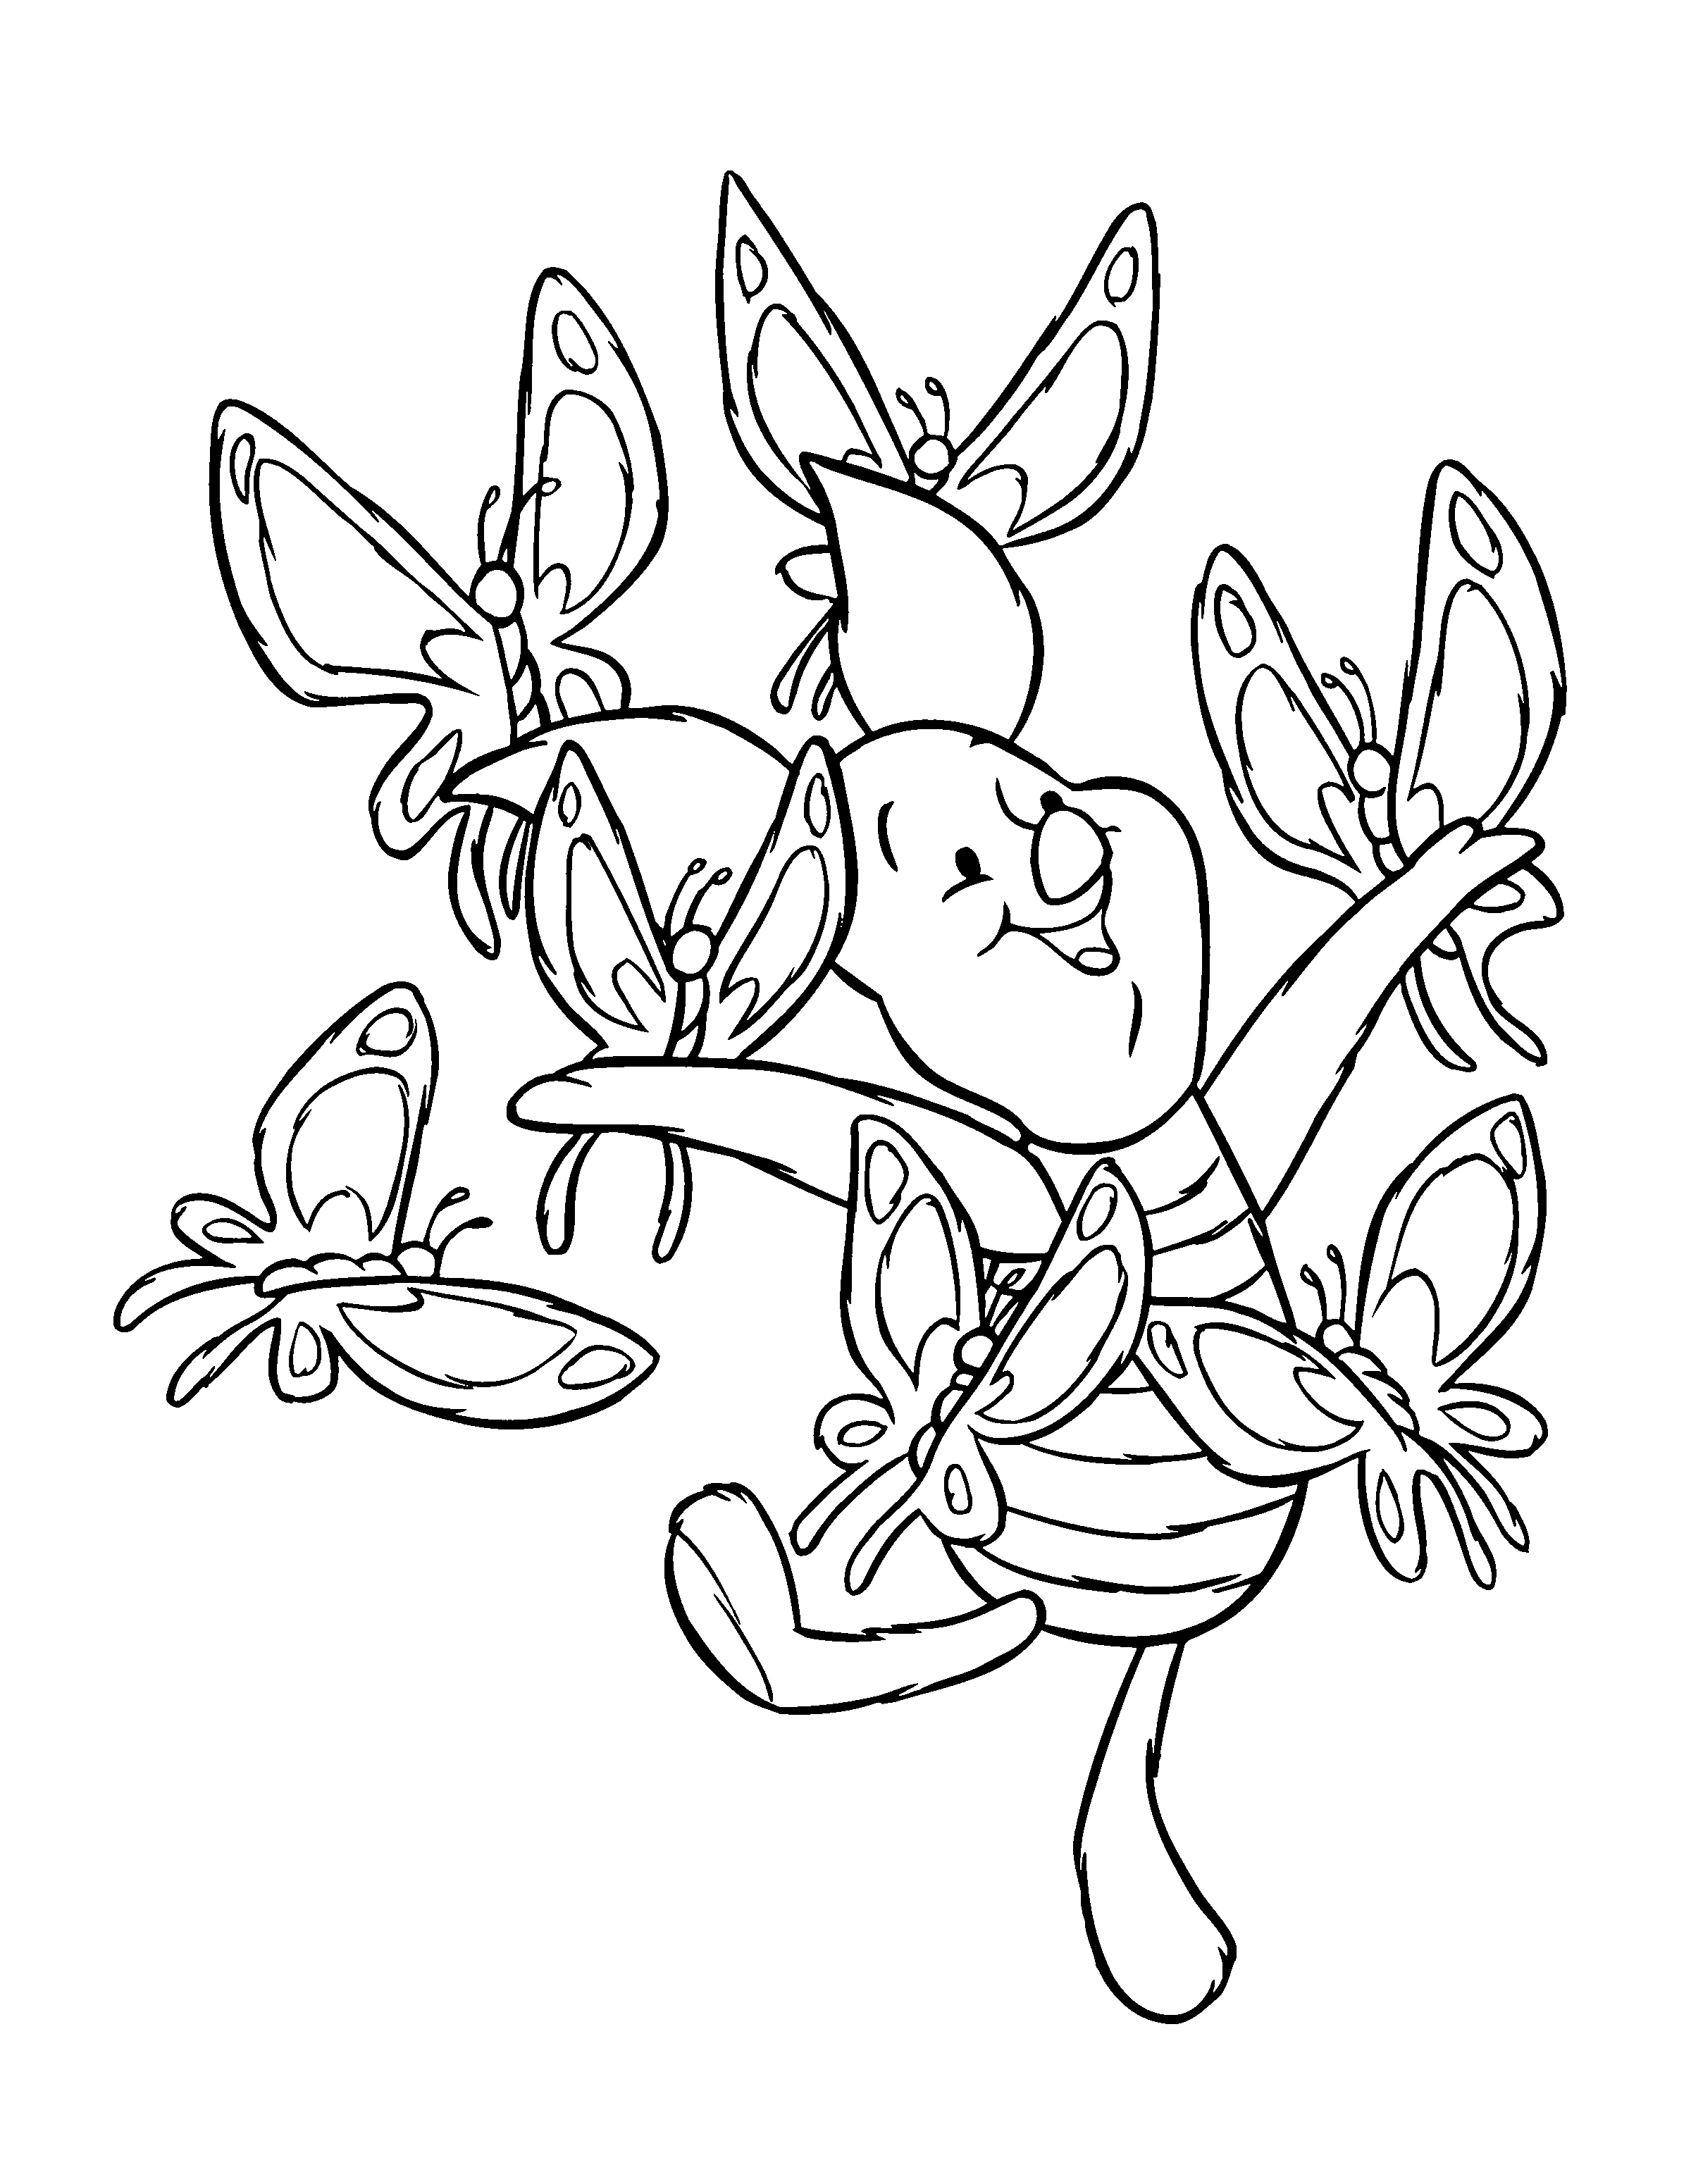 Winnie The Pooh Christmas Coloring Page: Winnie the Pooh Face ...